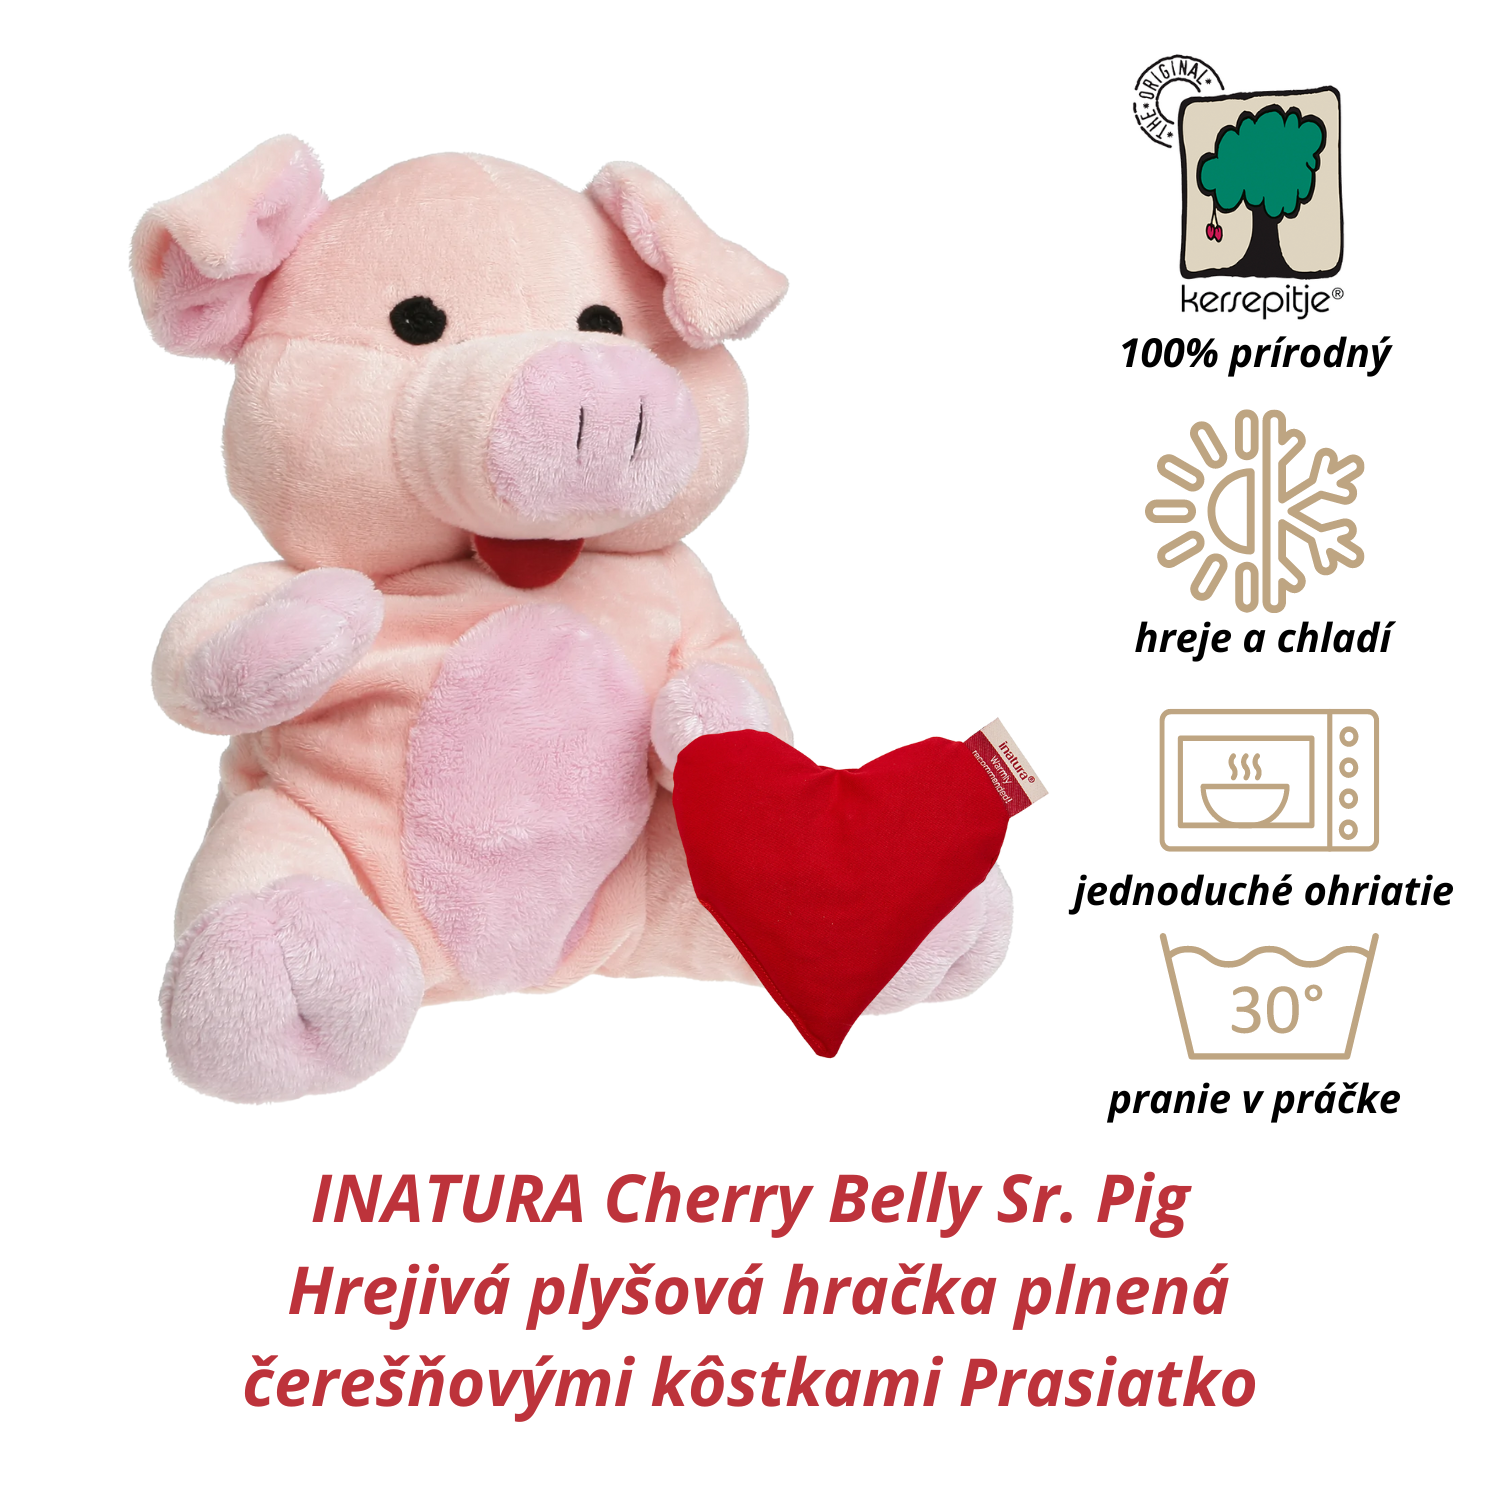 INATURA Cherry Belly Sr. Pig